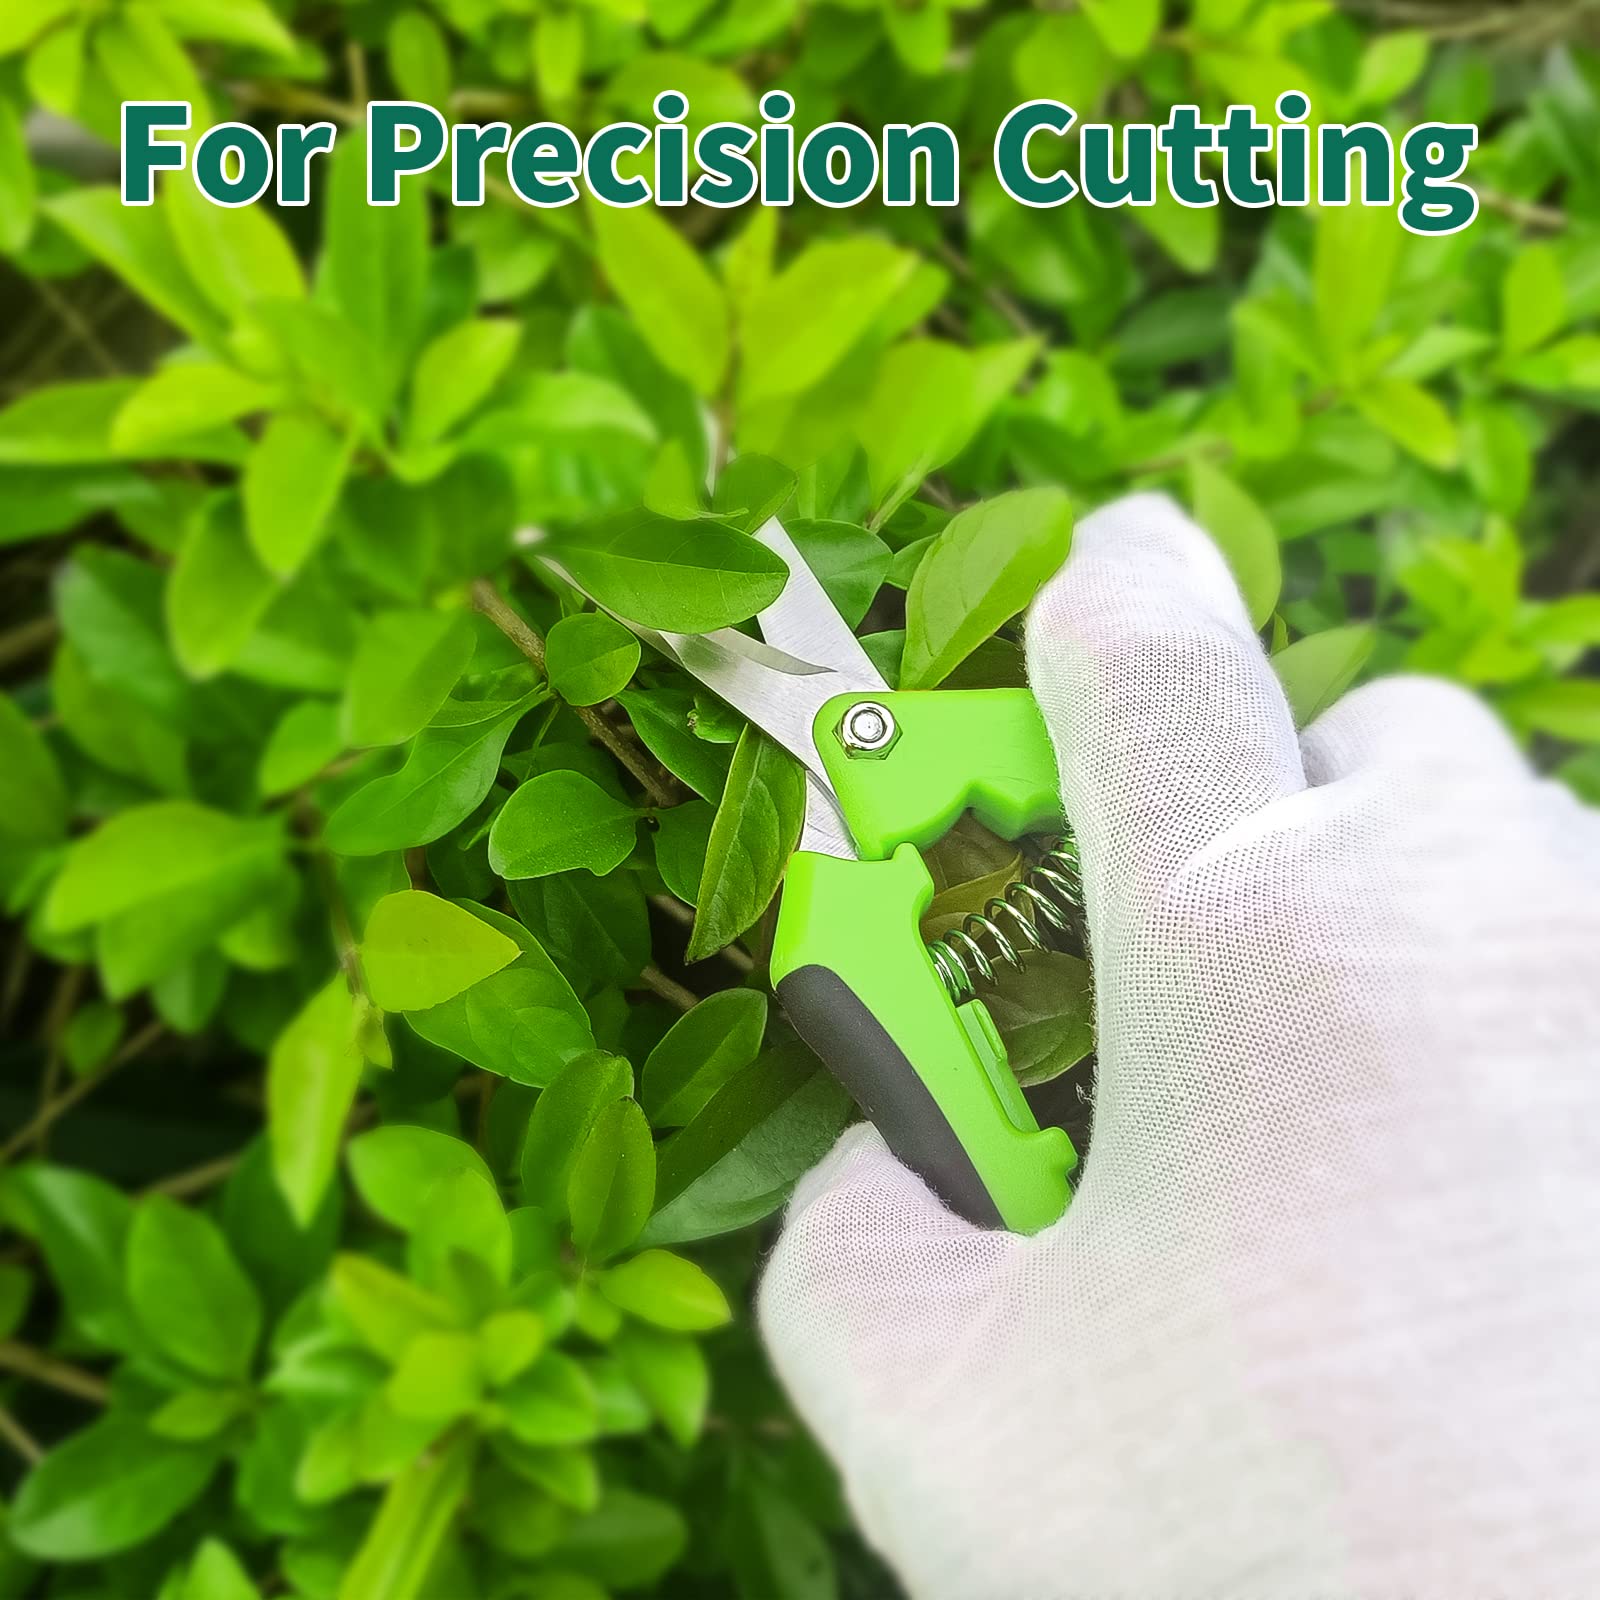 SZHLUX 1-Pack Pruning Shears, 6.5'' Gardening Hand Pruner, Professional Pruning Scissors with Straight Stainless Steel Precision Blades